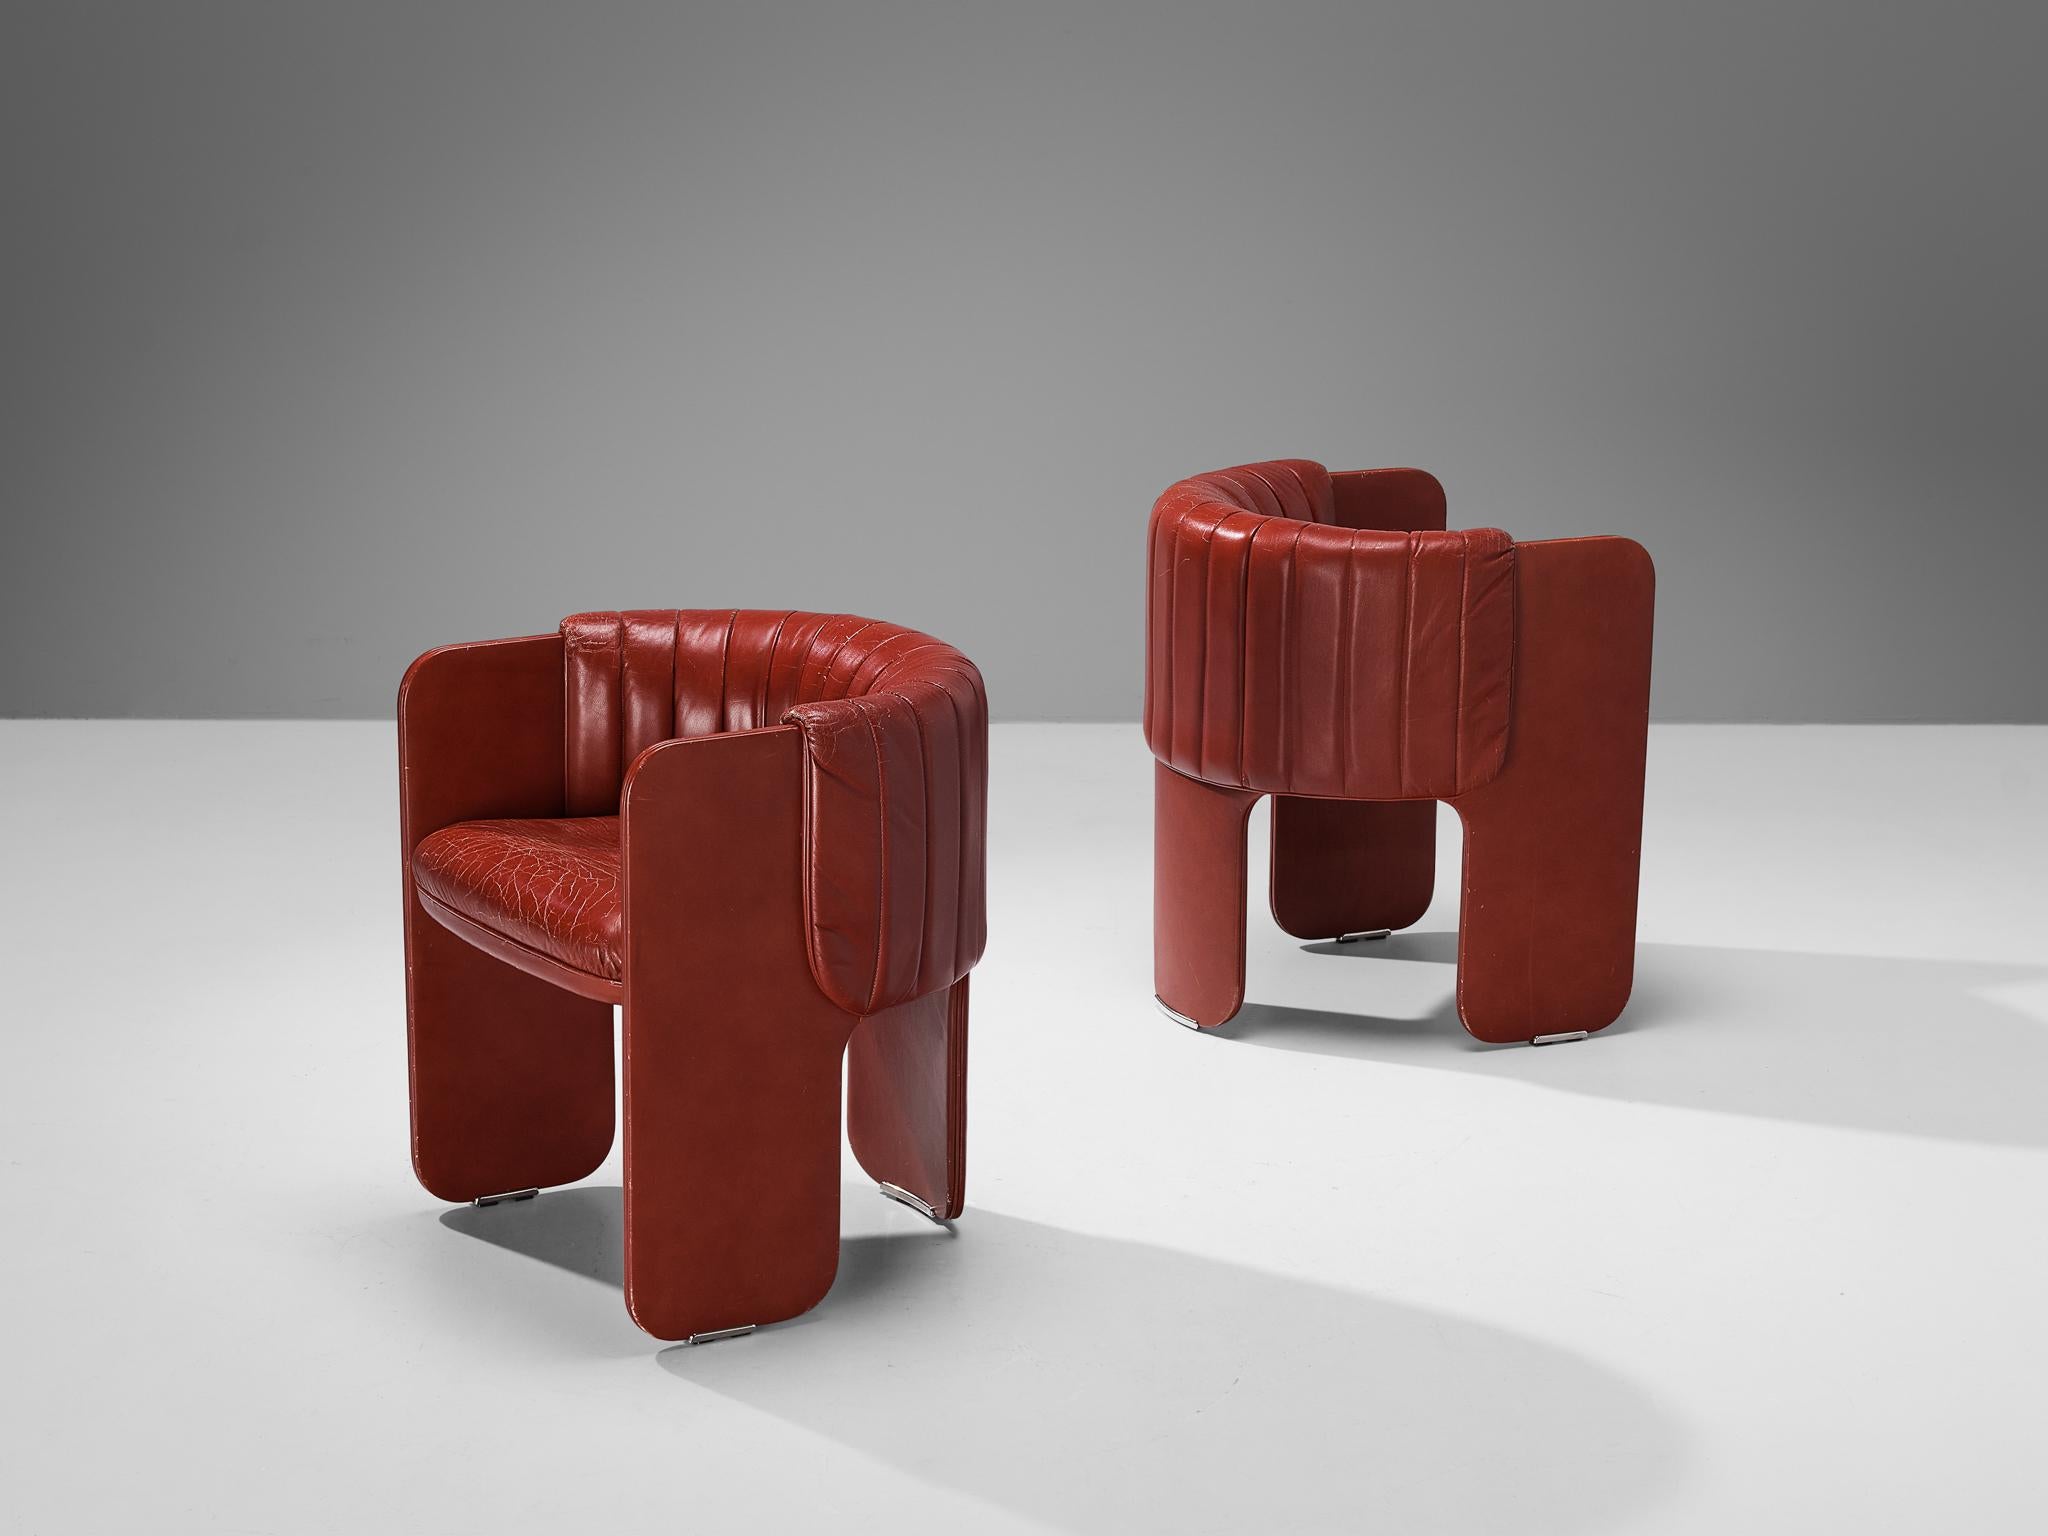 Luigi Massoni for Poltrona Frau, pair of armchairs, model ‘Dinette’, leather, chrome, Italy, 1980s

This pair of dining chairs epitomizes a splendid construction based on characteristic shapes and executed in a vivid burgundy red leather.